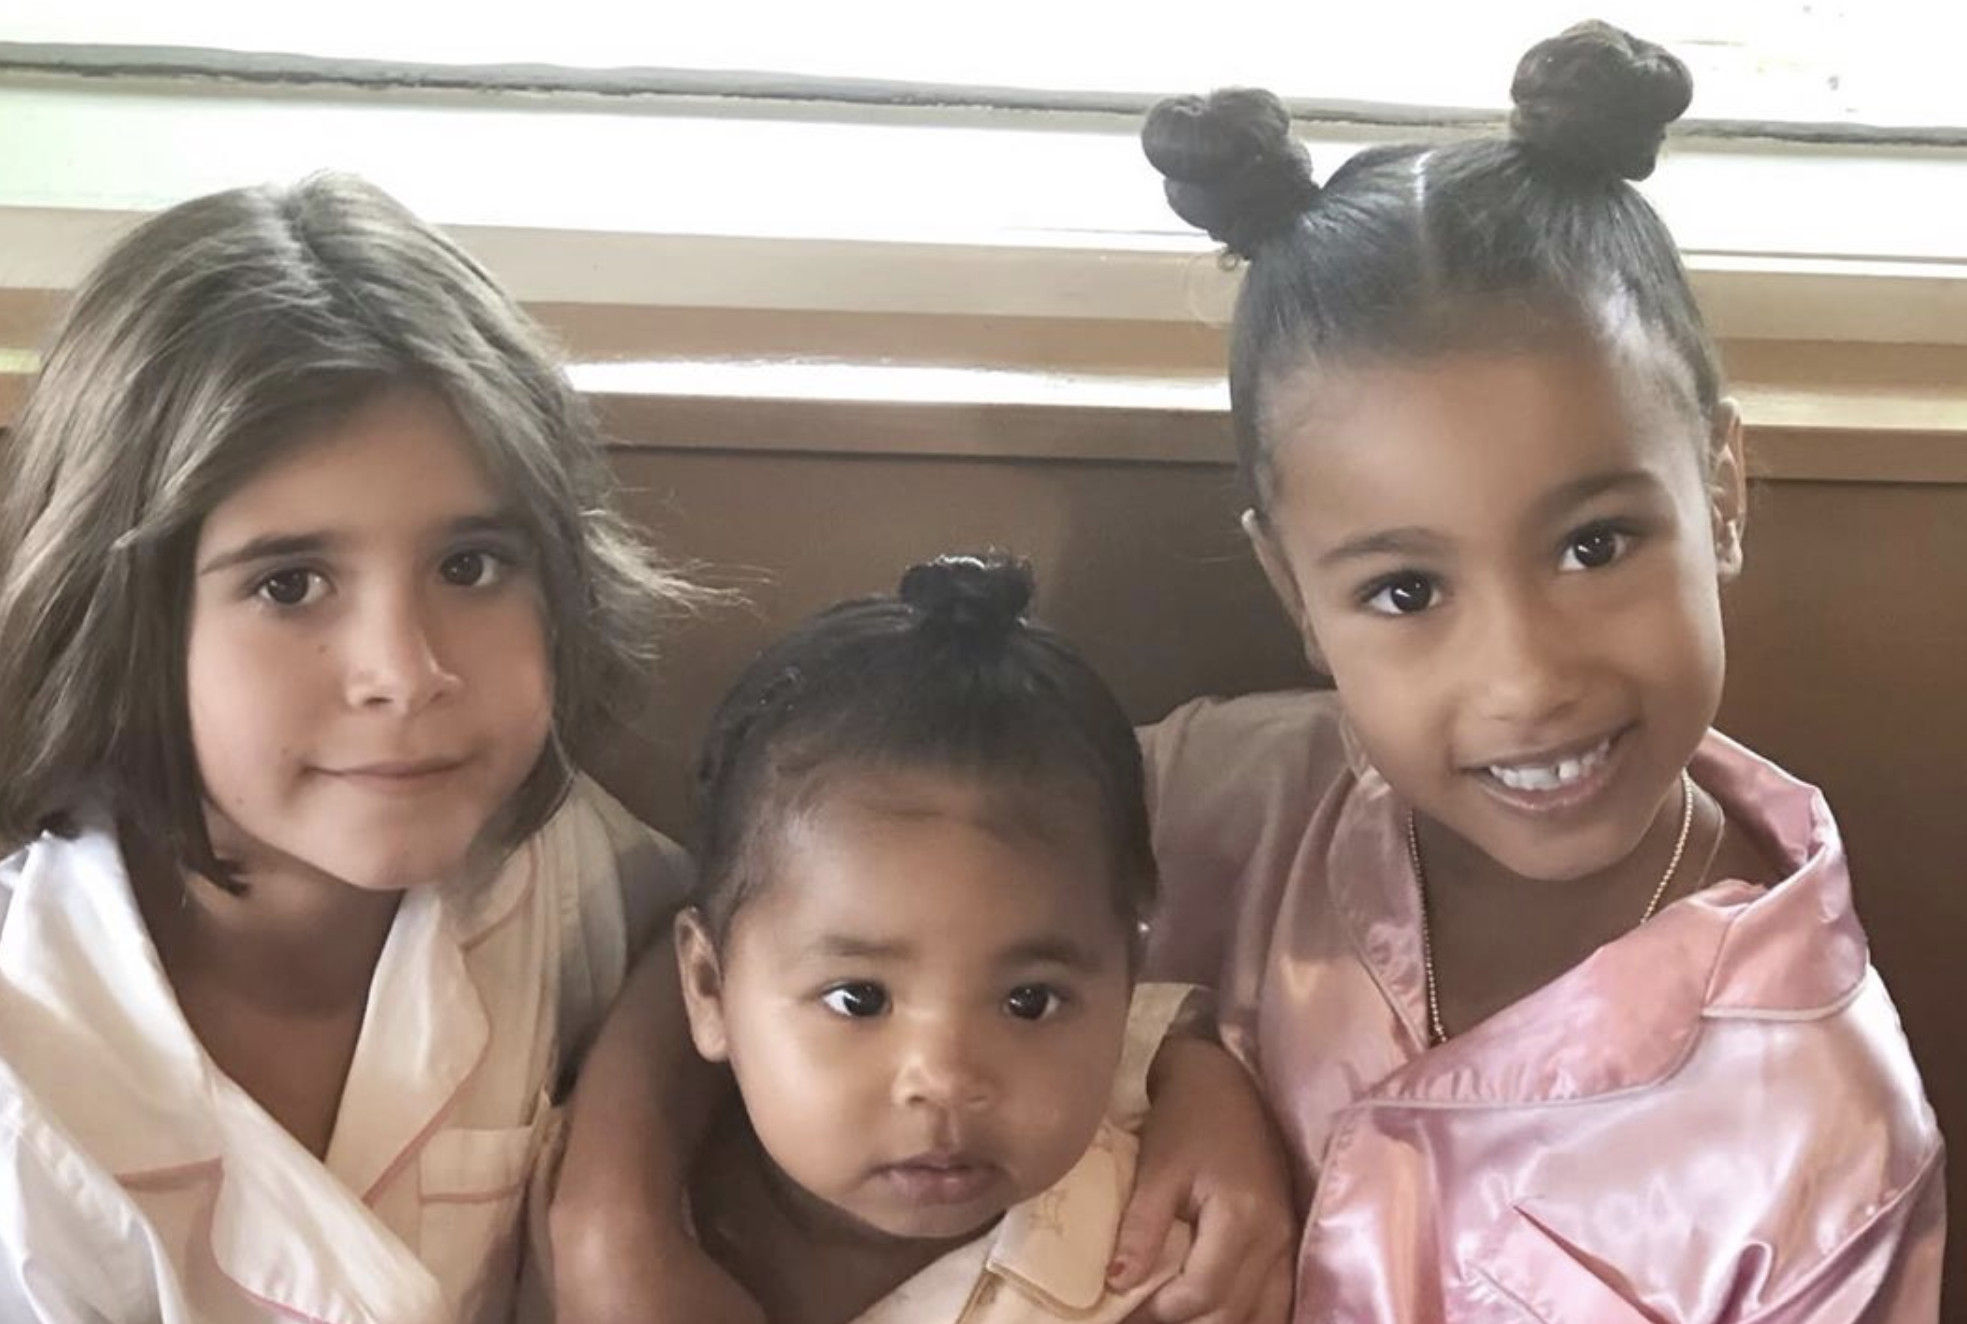 Khloe Kardashian posts an adorable photo of her daughter True with Psalm,  Chicago, and Dream